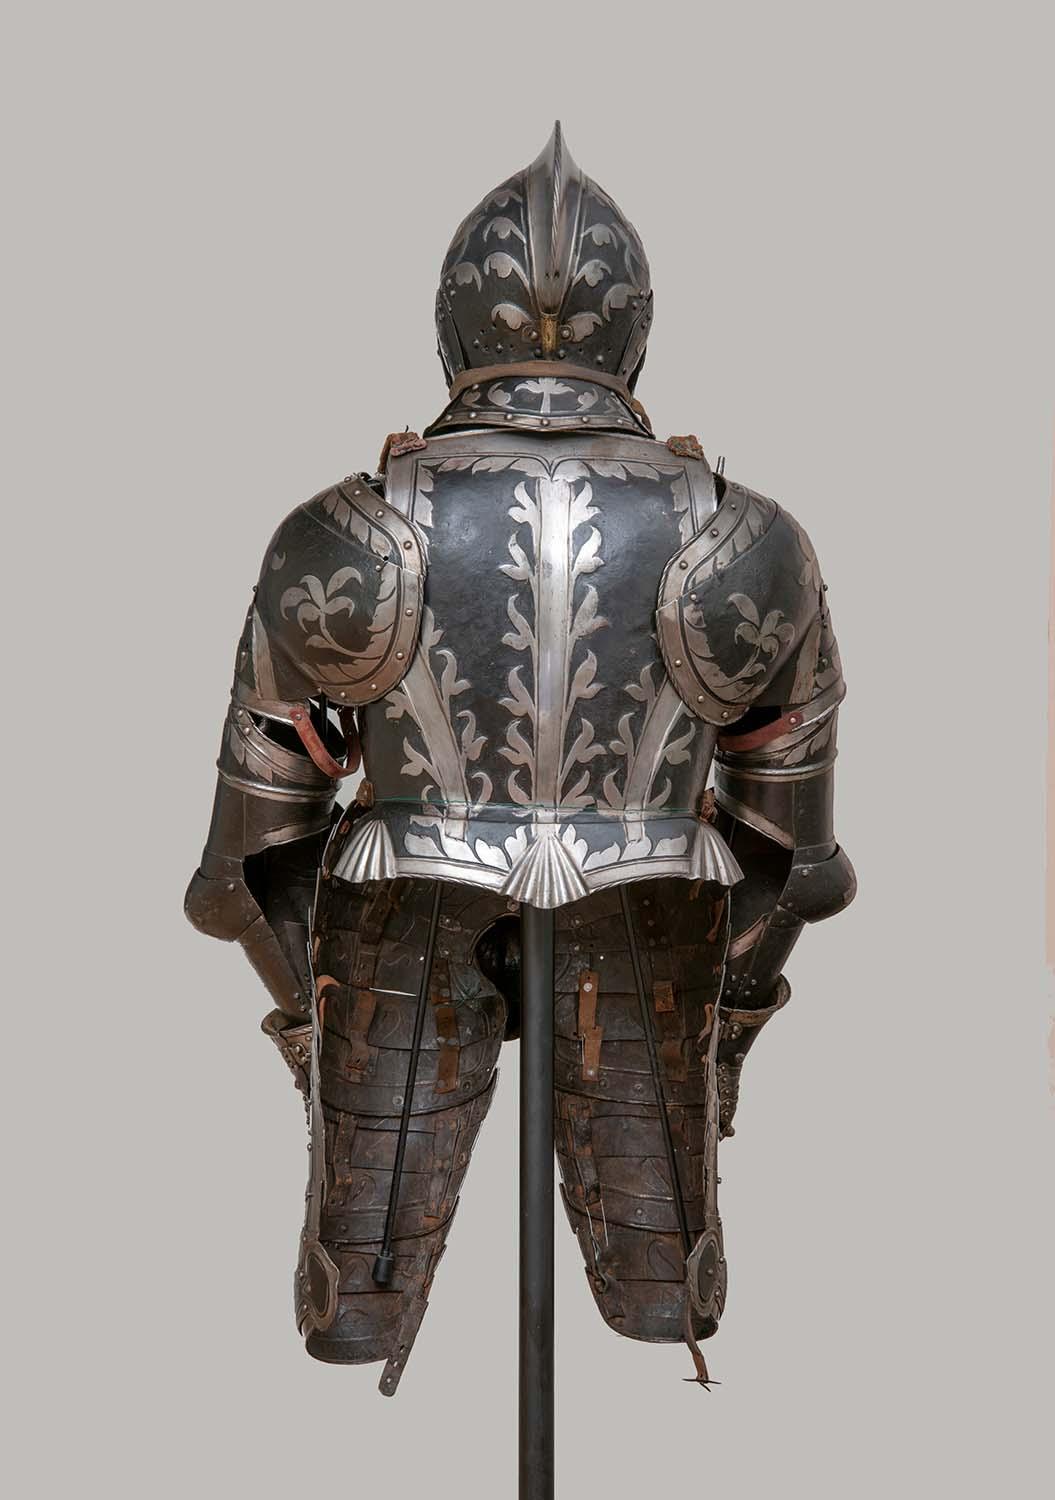 The foot soldier’s armour by Michael Witz the Younger